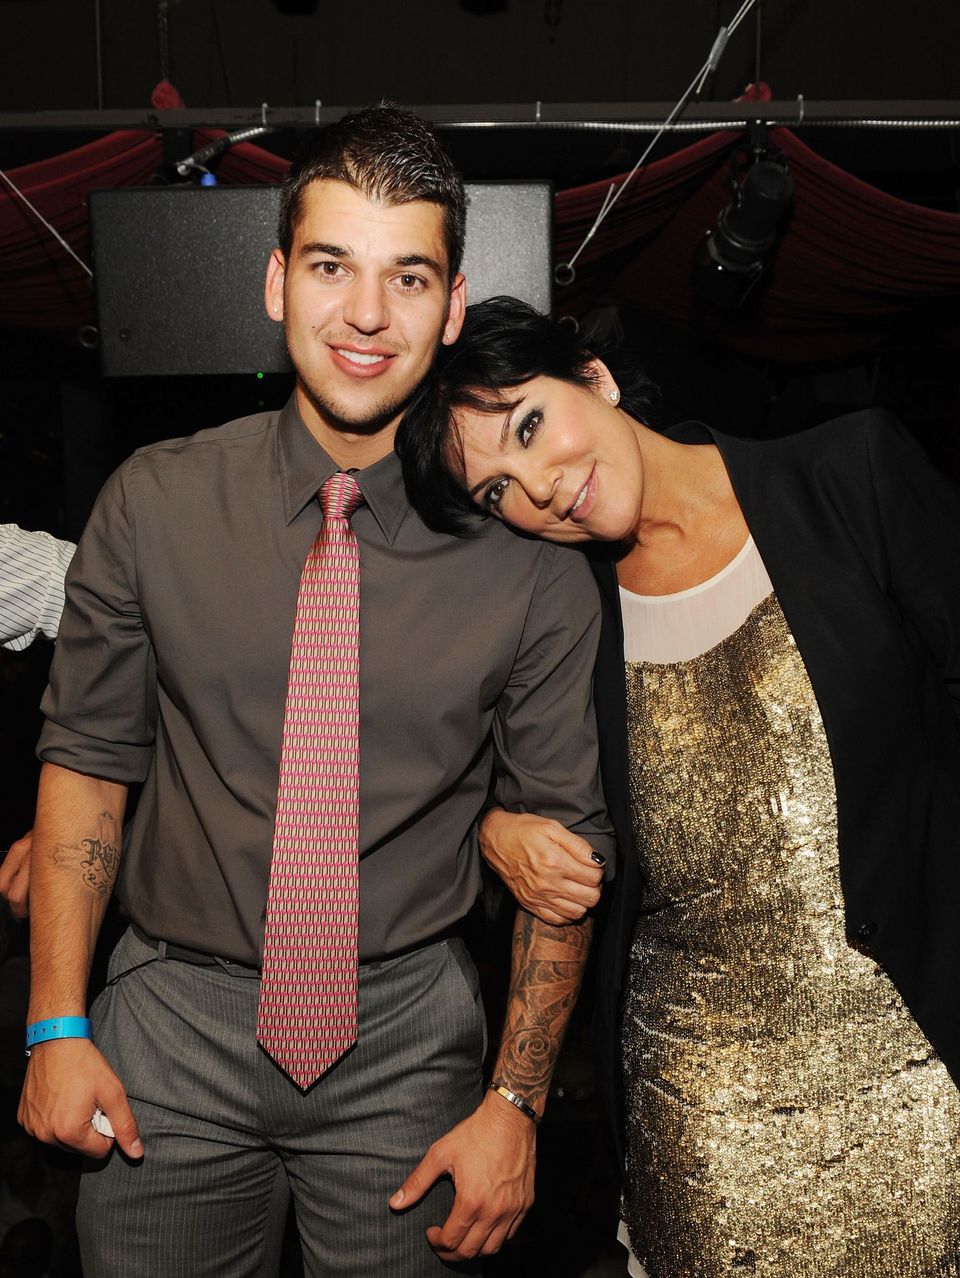 Rob Kardashian and Kris Kardashian during a night out at TAO Nightclub at the Venetian on October 16, 2009 in Las Vegas, Nevada. | Source: Getty Images